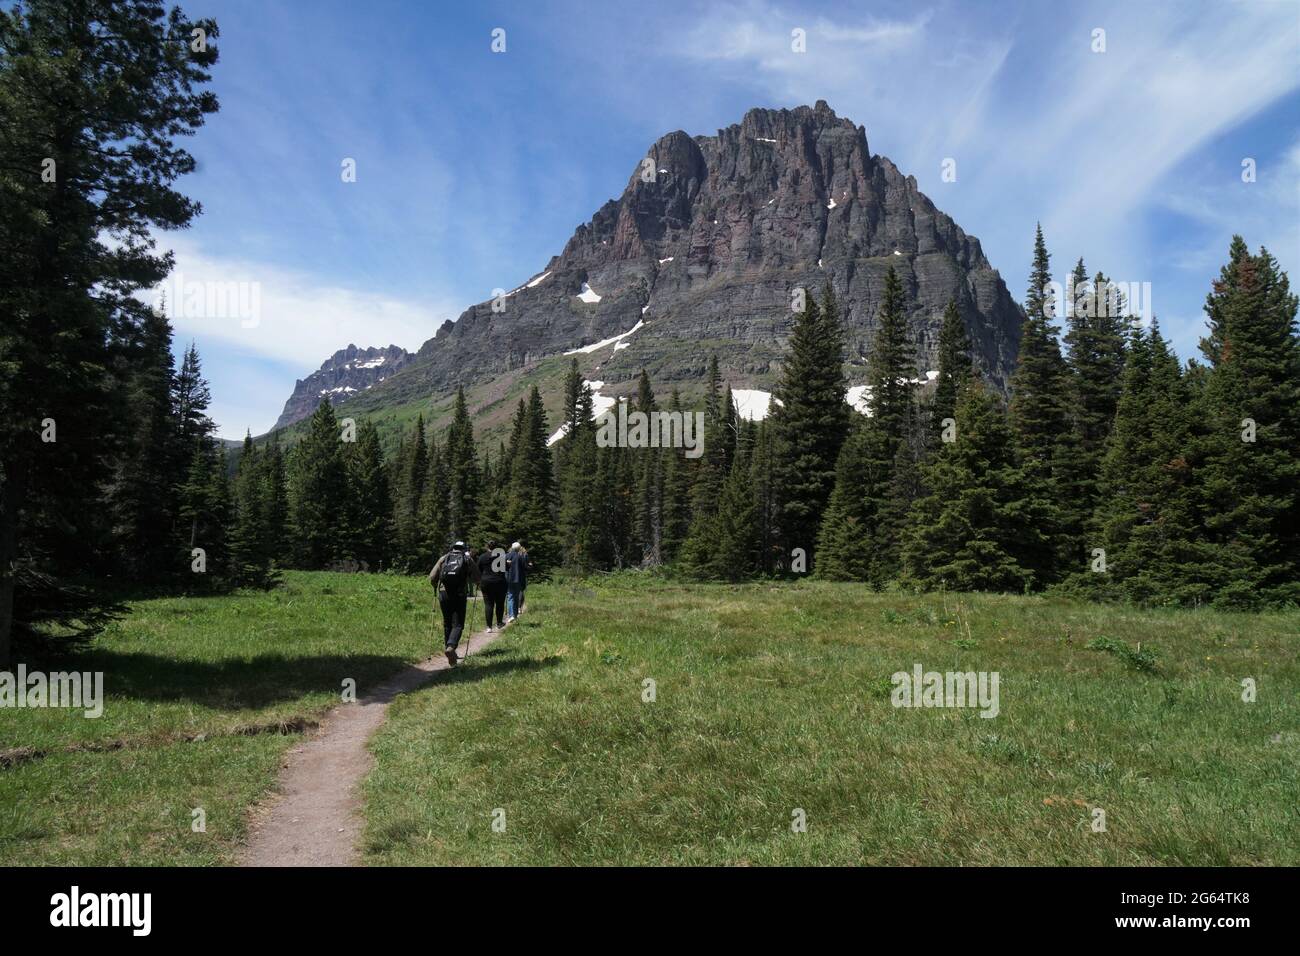 Glacier National Park in Northwest Montana is stunning in every sense of the word, offering spectacular vistas of mountains, lakes and wildlife. Stock Photo